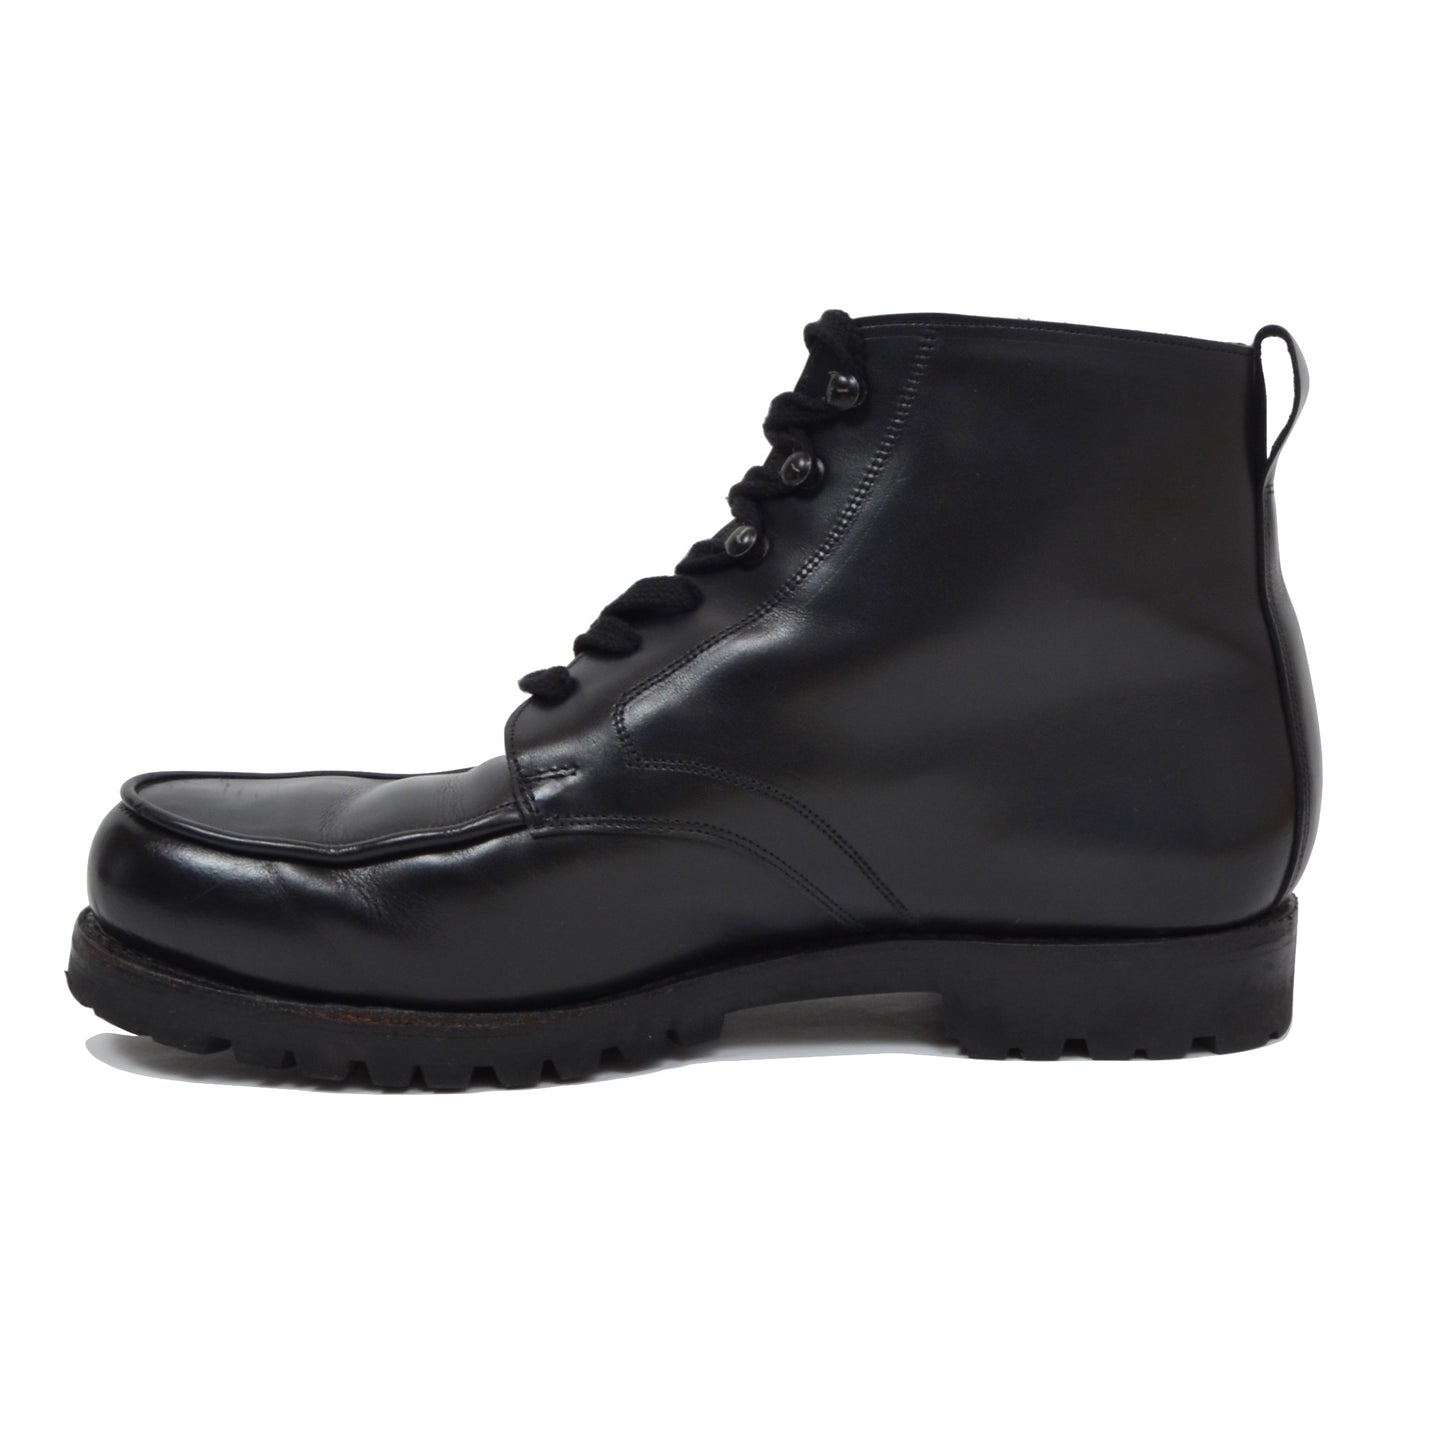 Ludwig Reiter Shearling-Lined Boots Size - Black